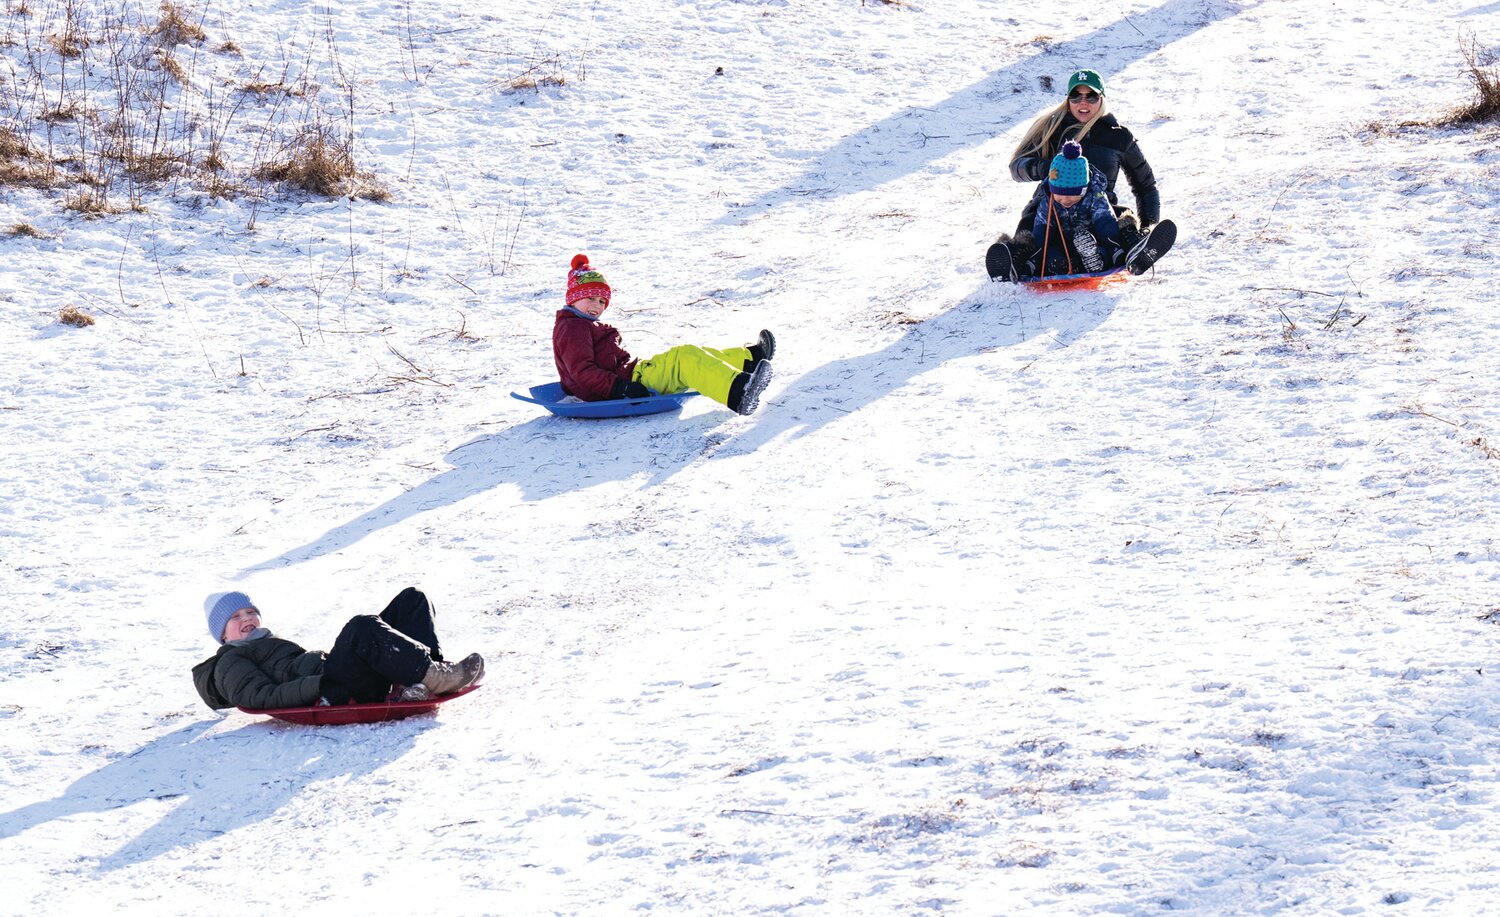 Sledders tackle Magill’s Hill Park in Solebury.